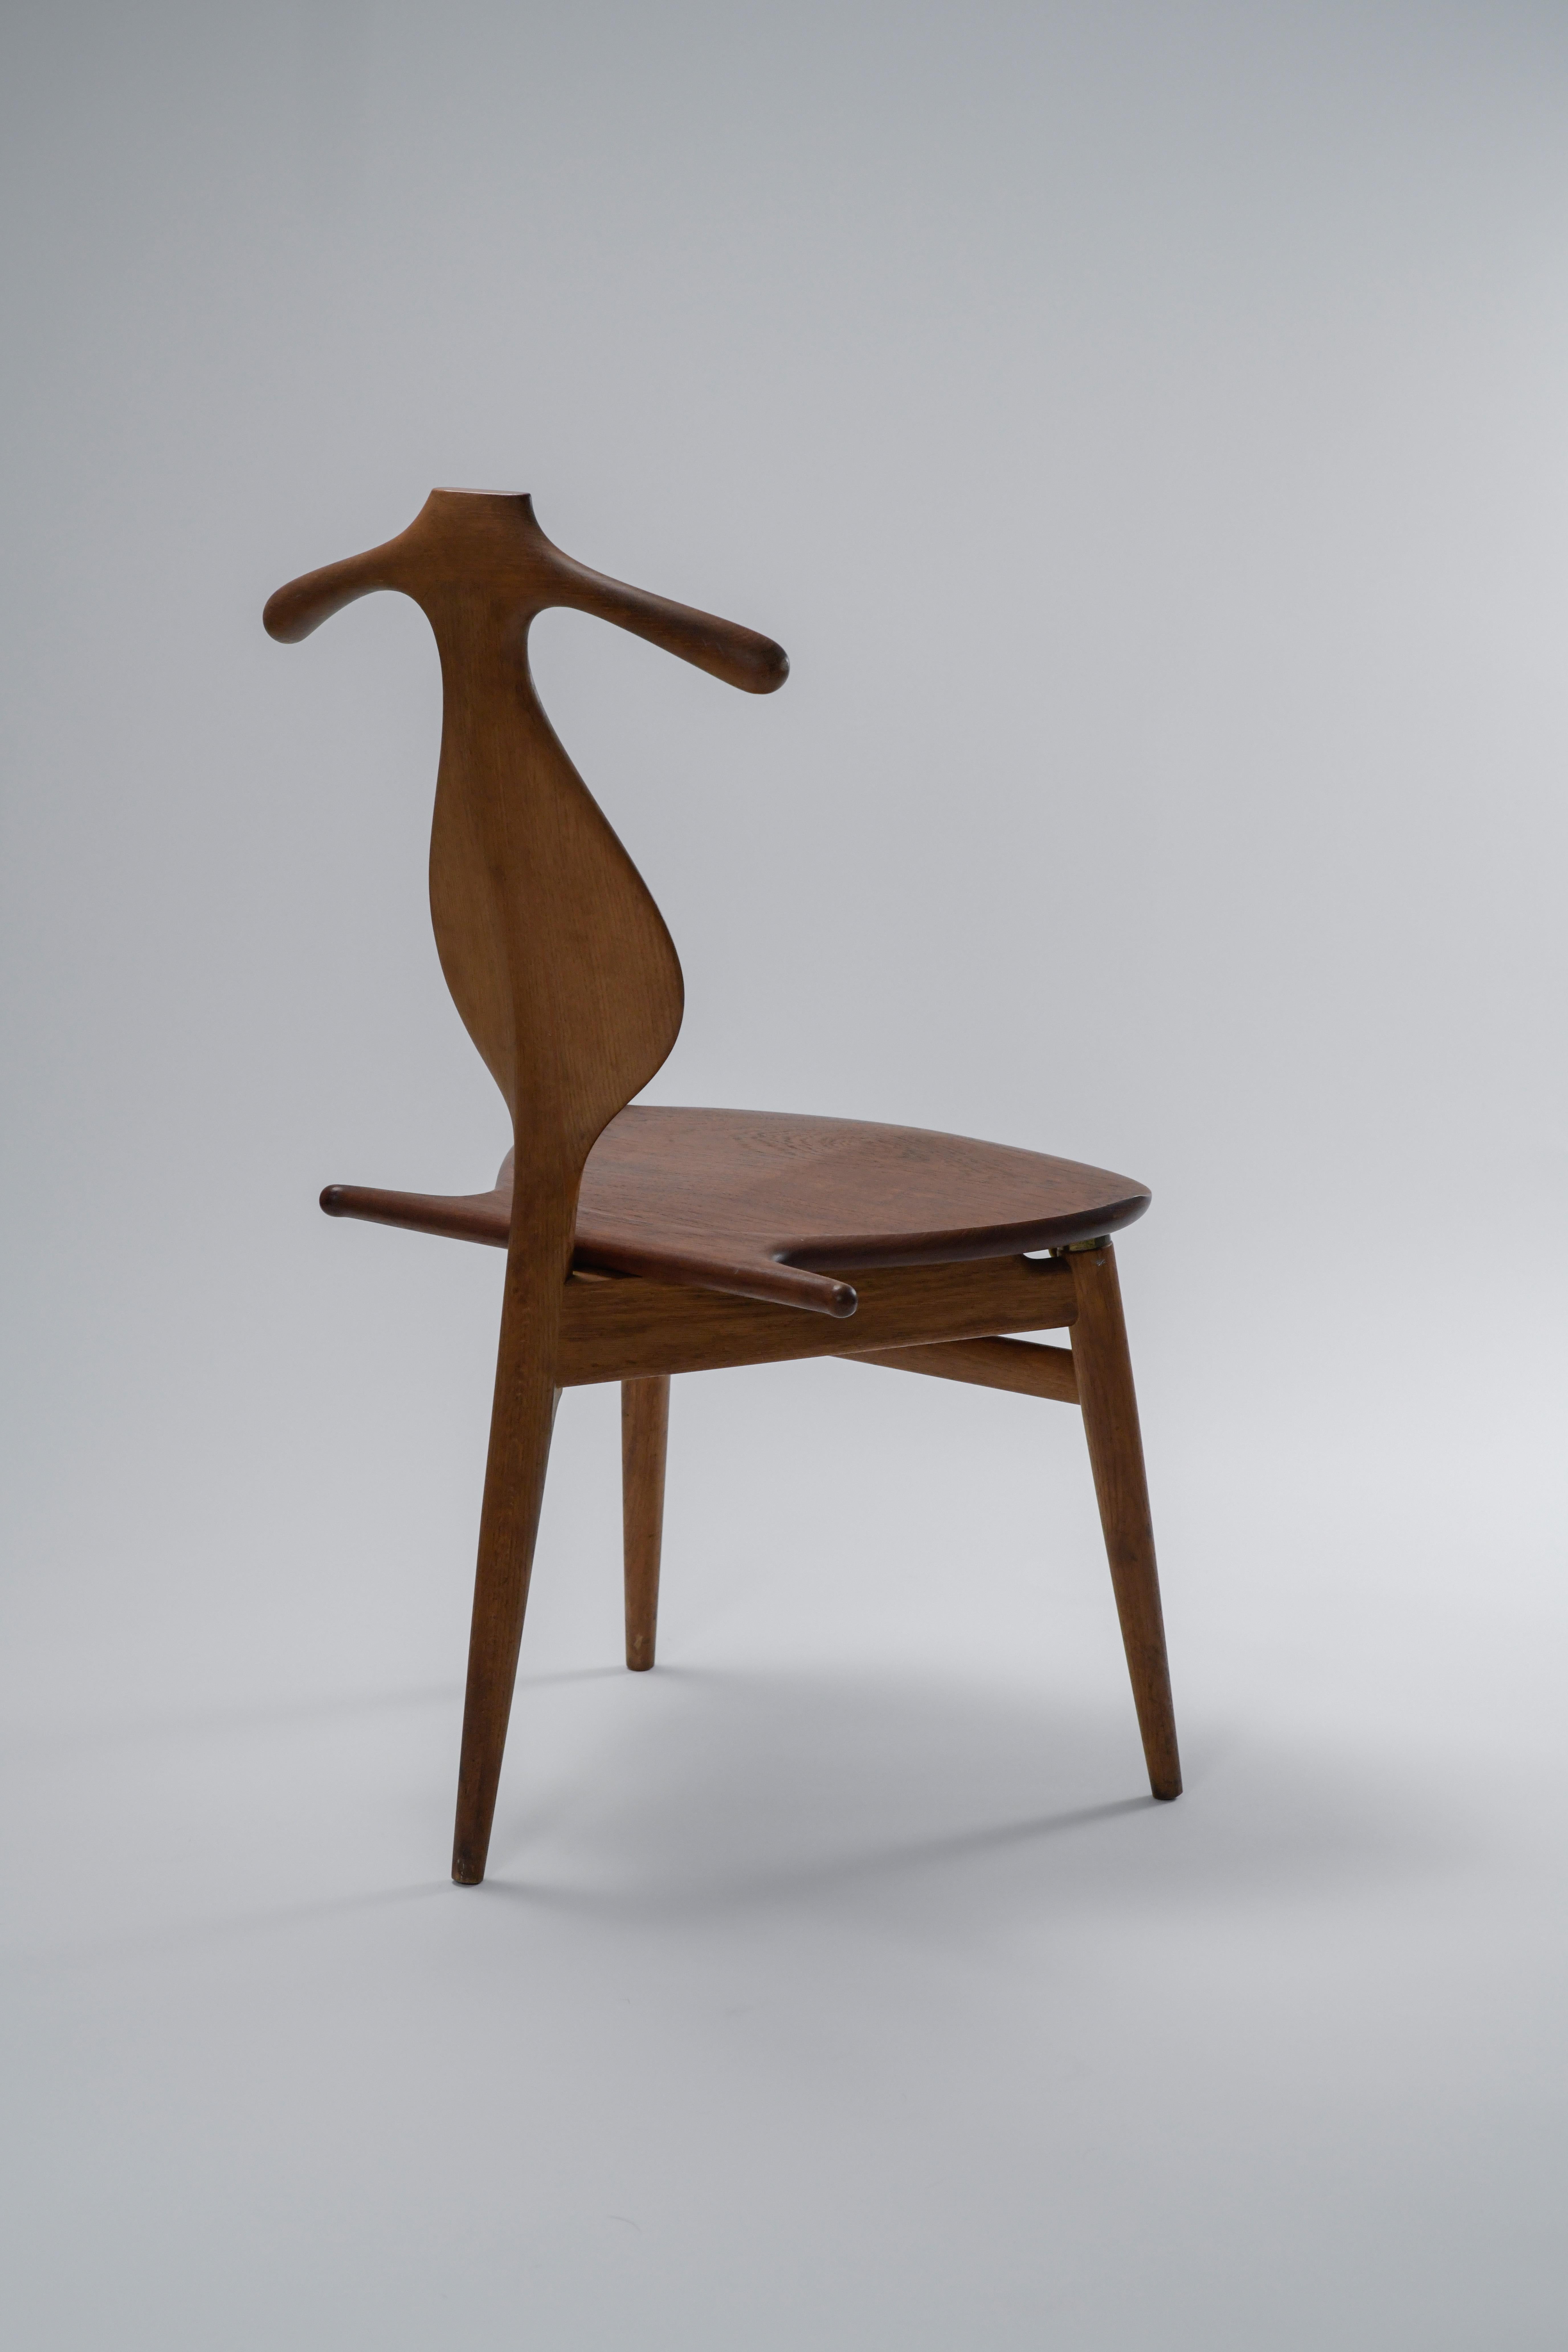 Model JH-540 Valet chair by Hans J. Wegner for Johannes Hansen. 

This gorgeous piece of mid century design is as functional as it as beautiful. The seat folds up to create a rack for hanging pants and also reveals a hidden compartment for small